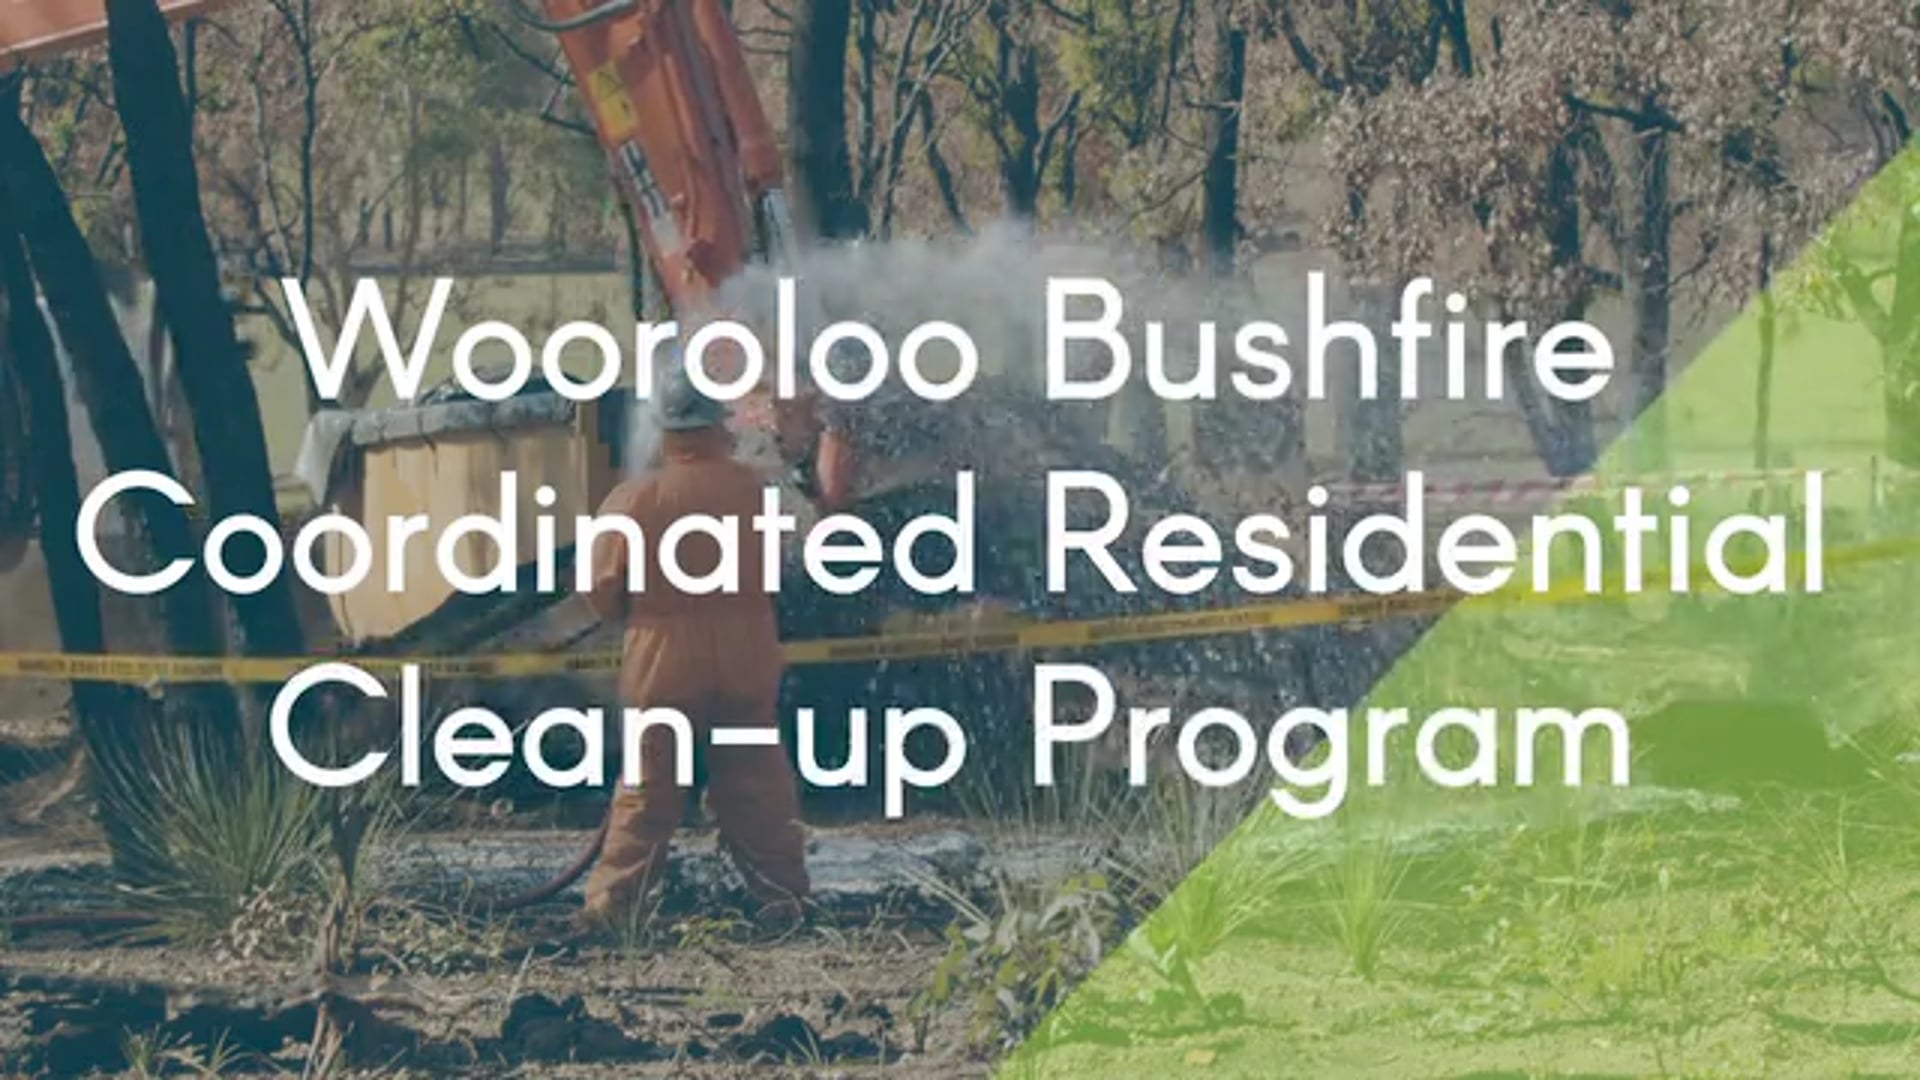 Thuroona Bush Fire Clean-up Video